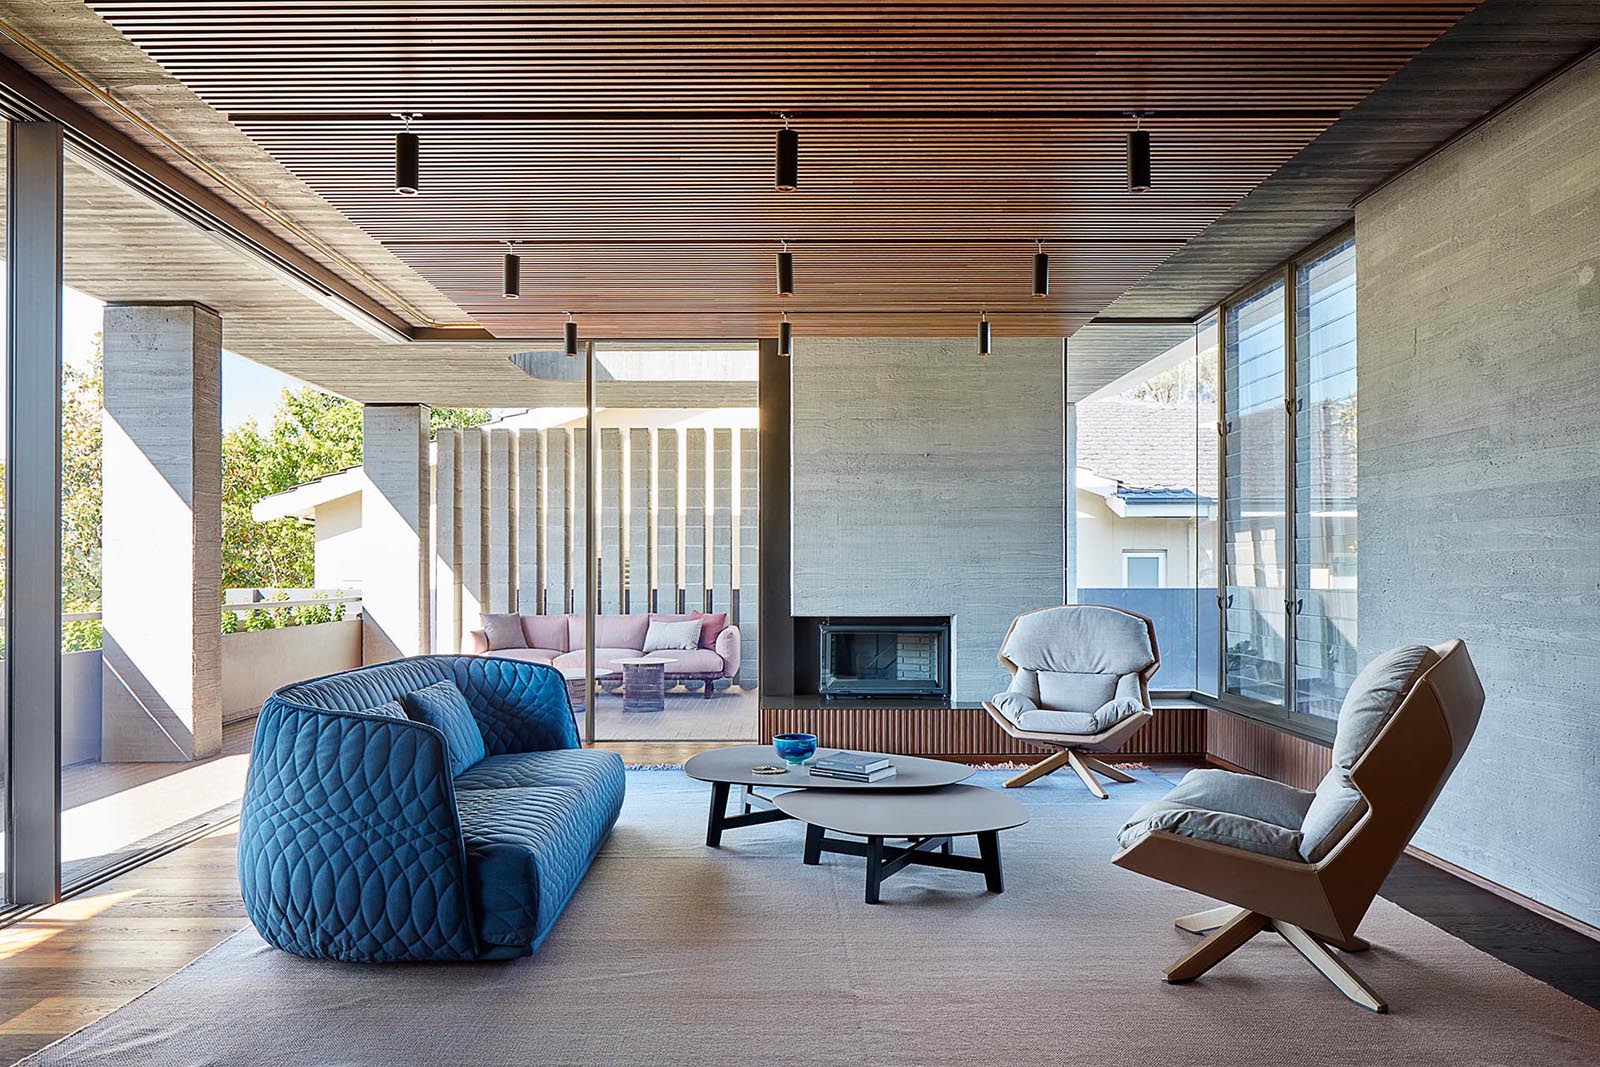 A modern living room with a fireplace that provides direct access to the covered outdoor area, and features a wood ceiling and board-formed concrete walls.